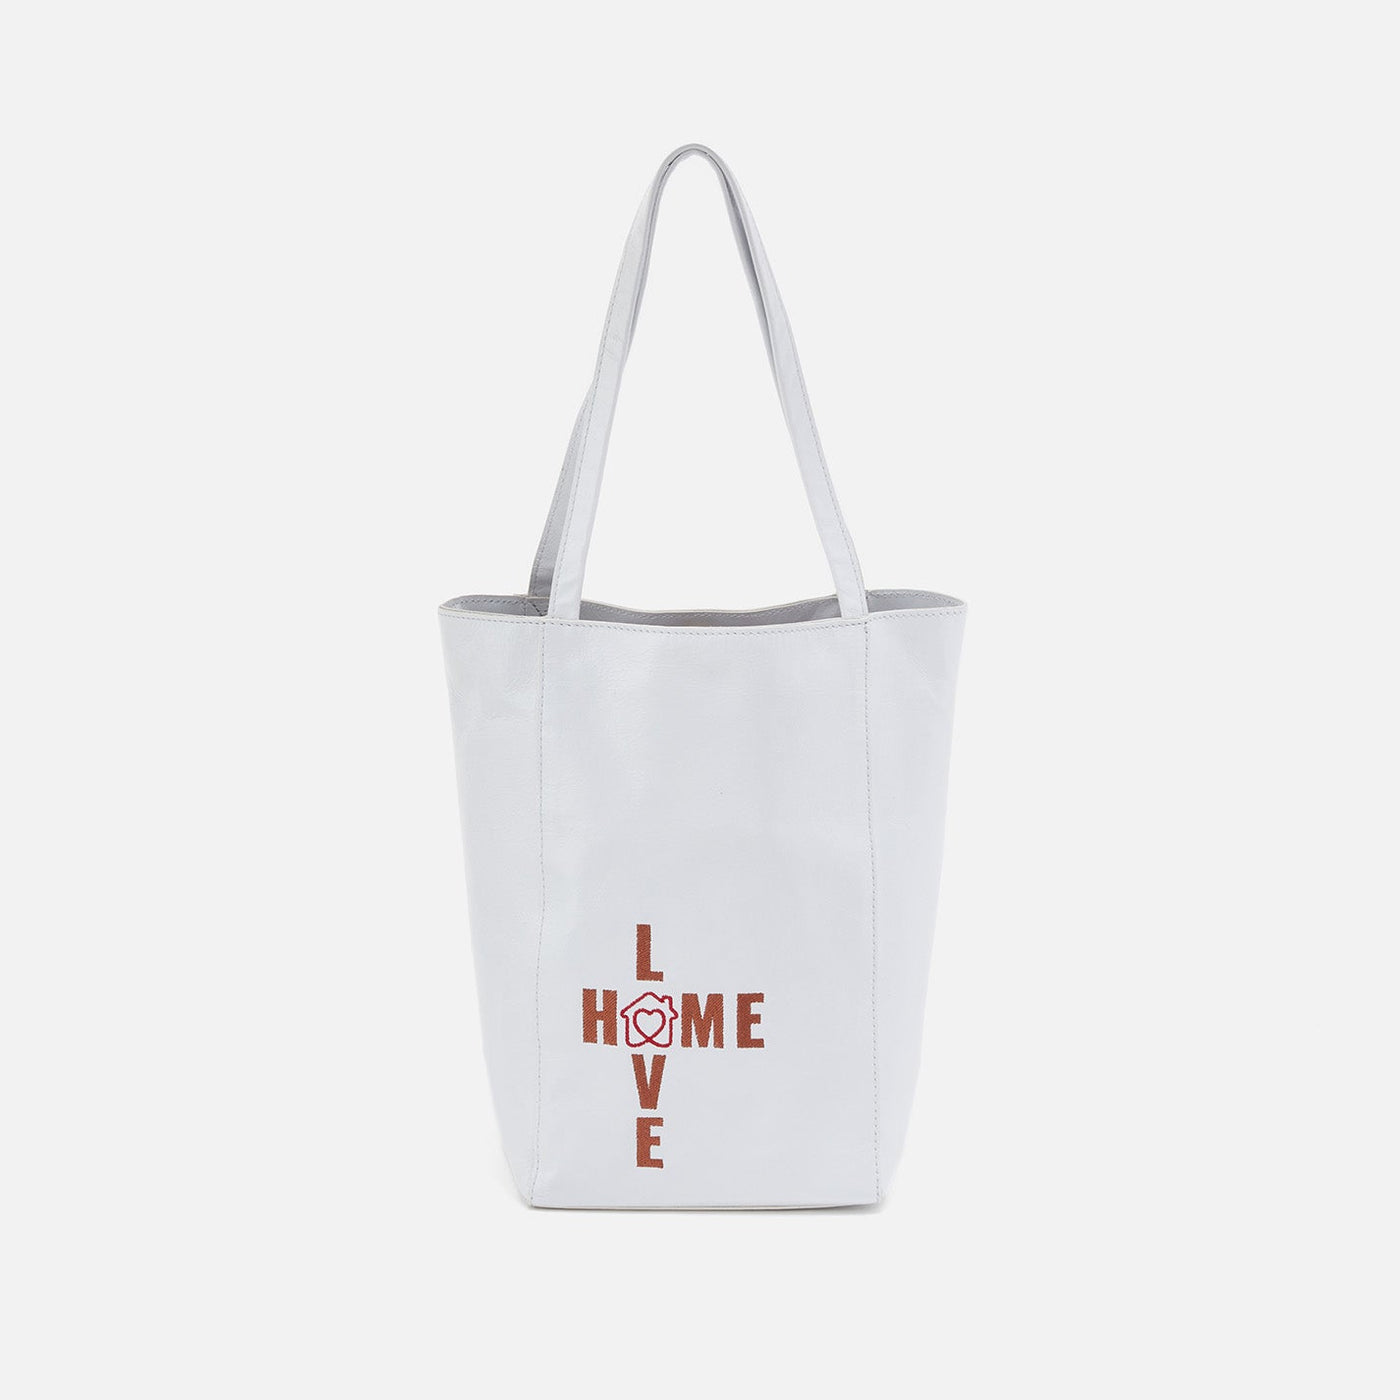 The Giving Tote Mini Tote in Polished Leather - Optic White